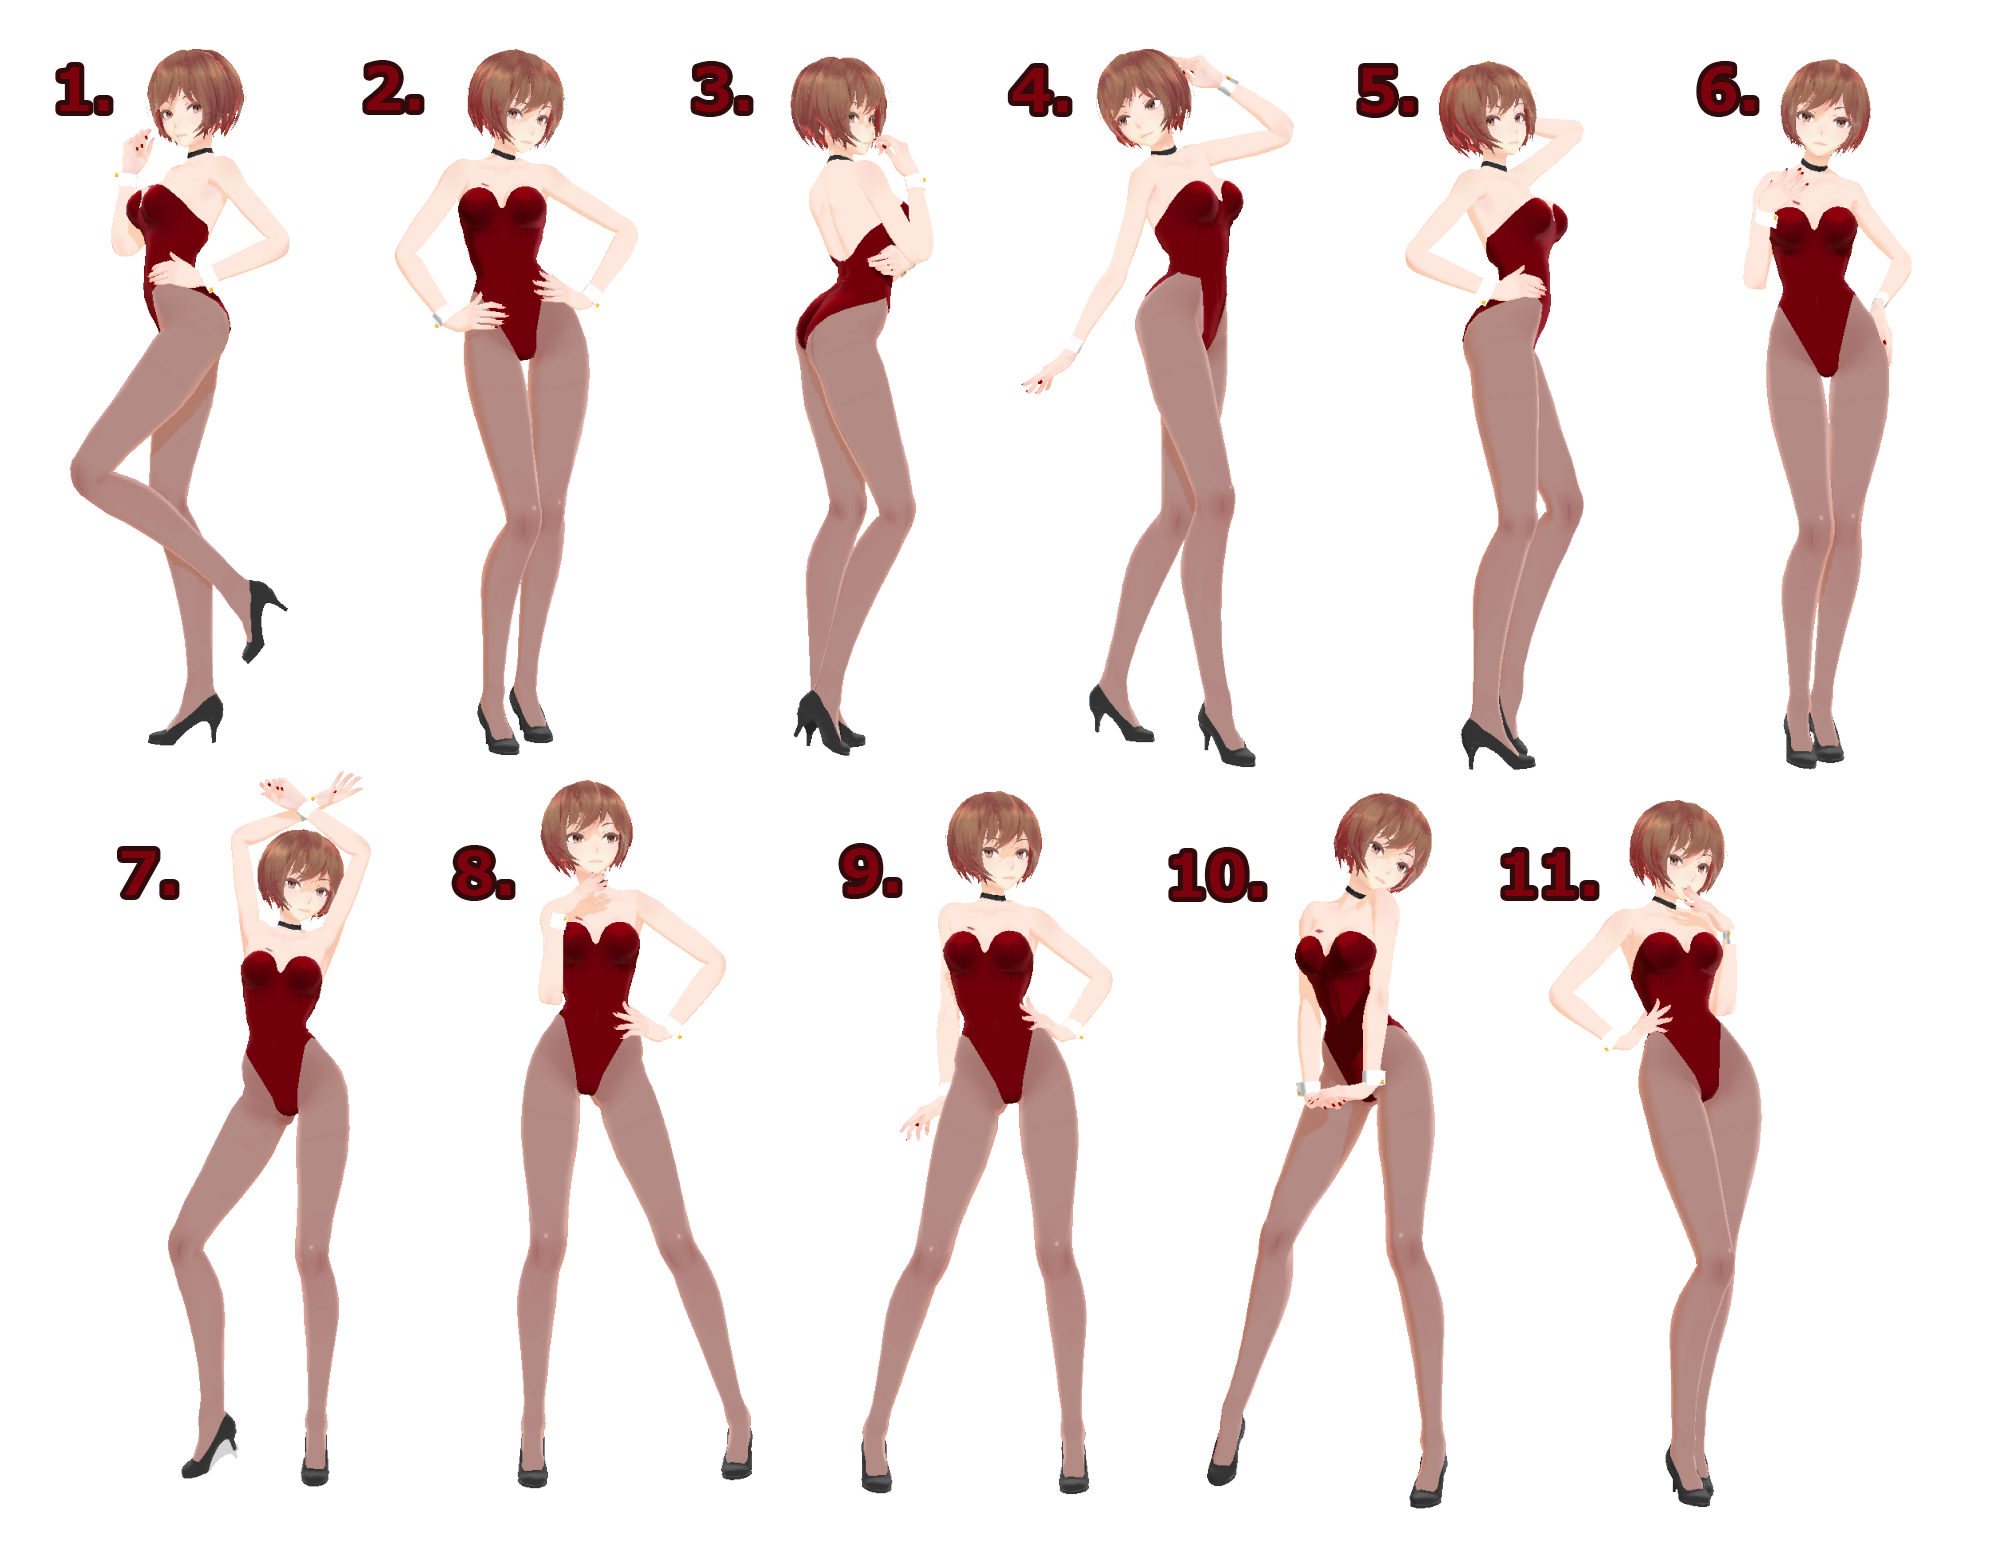 MMD] Pose Pack 3 - DL by Snorlaxin on DeviantArt